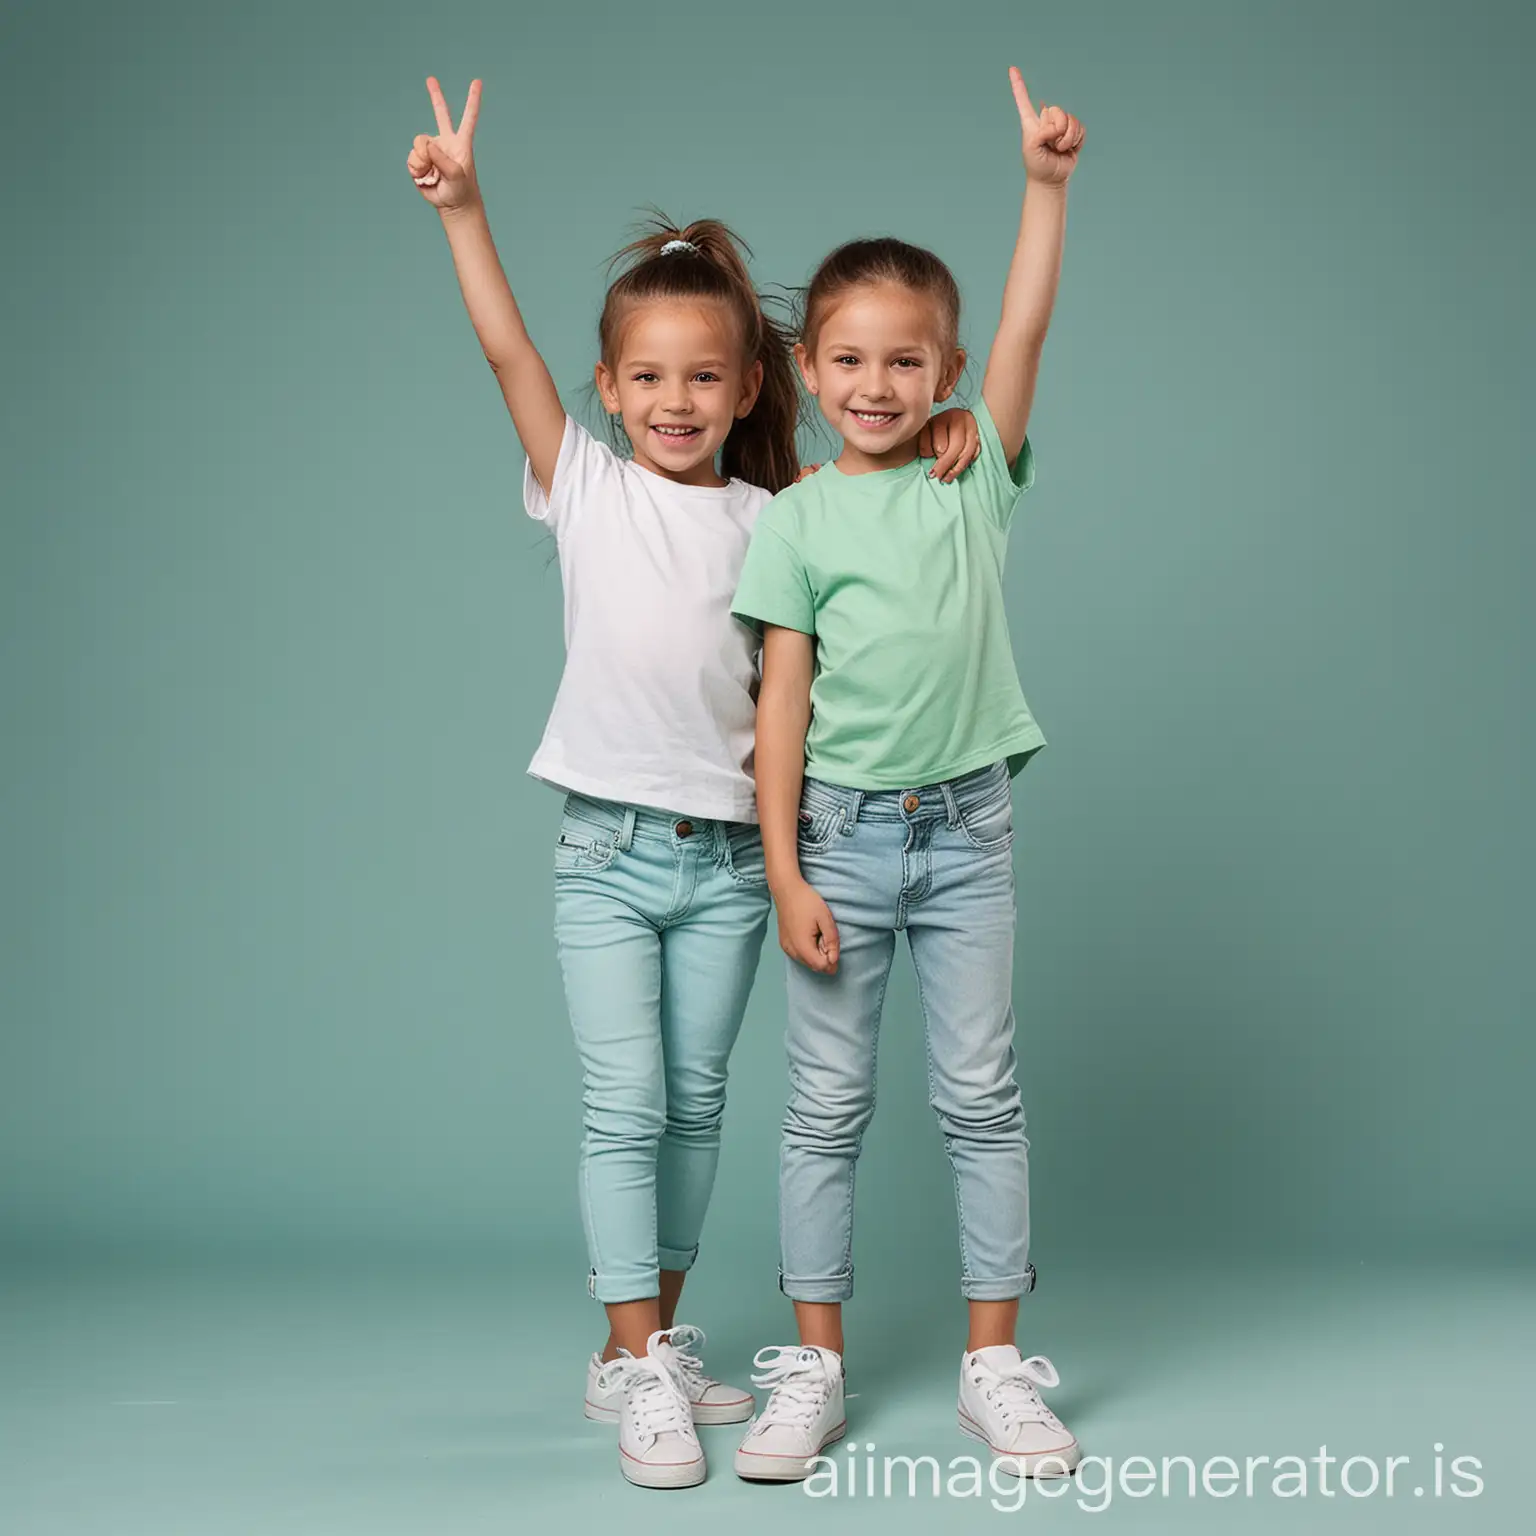 a group of 2 children around 4 years old who are very happy, joyful. A girl and a boy. They are seen full length against a background color is light cyan. The boy wears casual clothes: jeans and a white tee-shirt. The girl wears a white legging and a light green tee shirt. Her hair is tied in a ponytail. The boy raises his fist in the air and the girl makes the victory sign with her hands. The boy and the girl hold hands